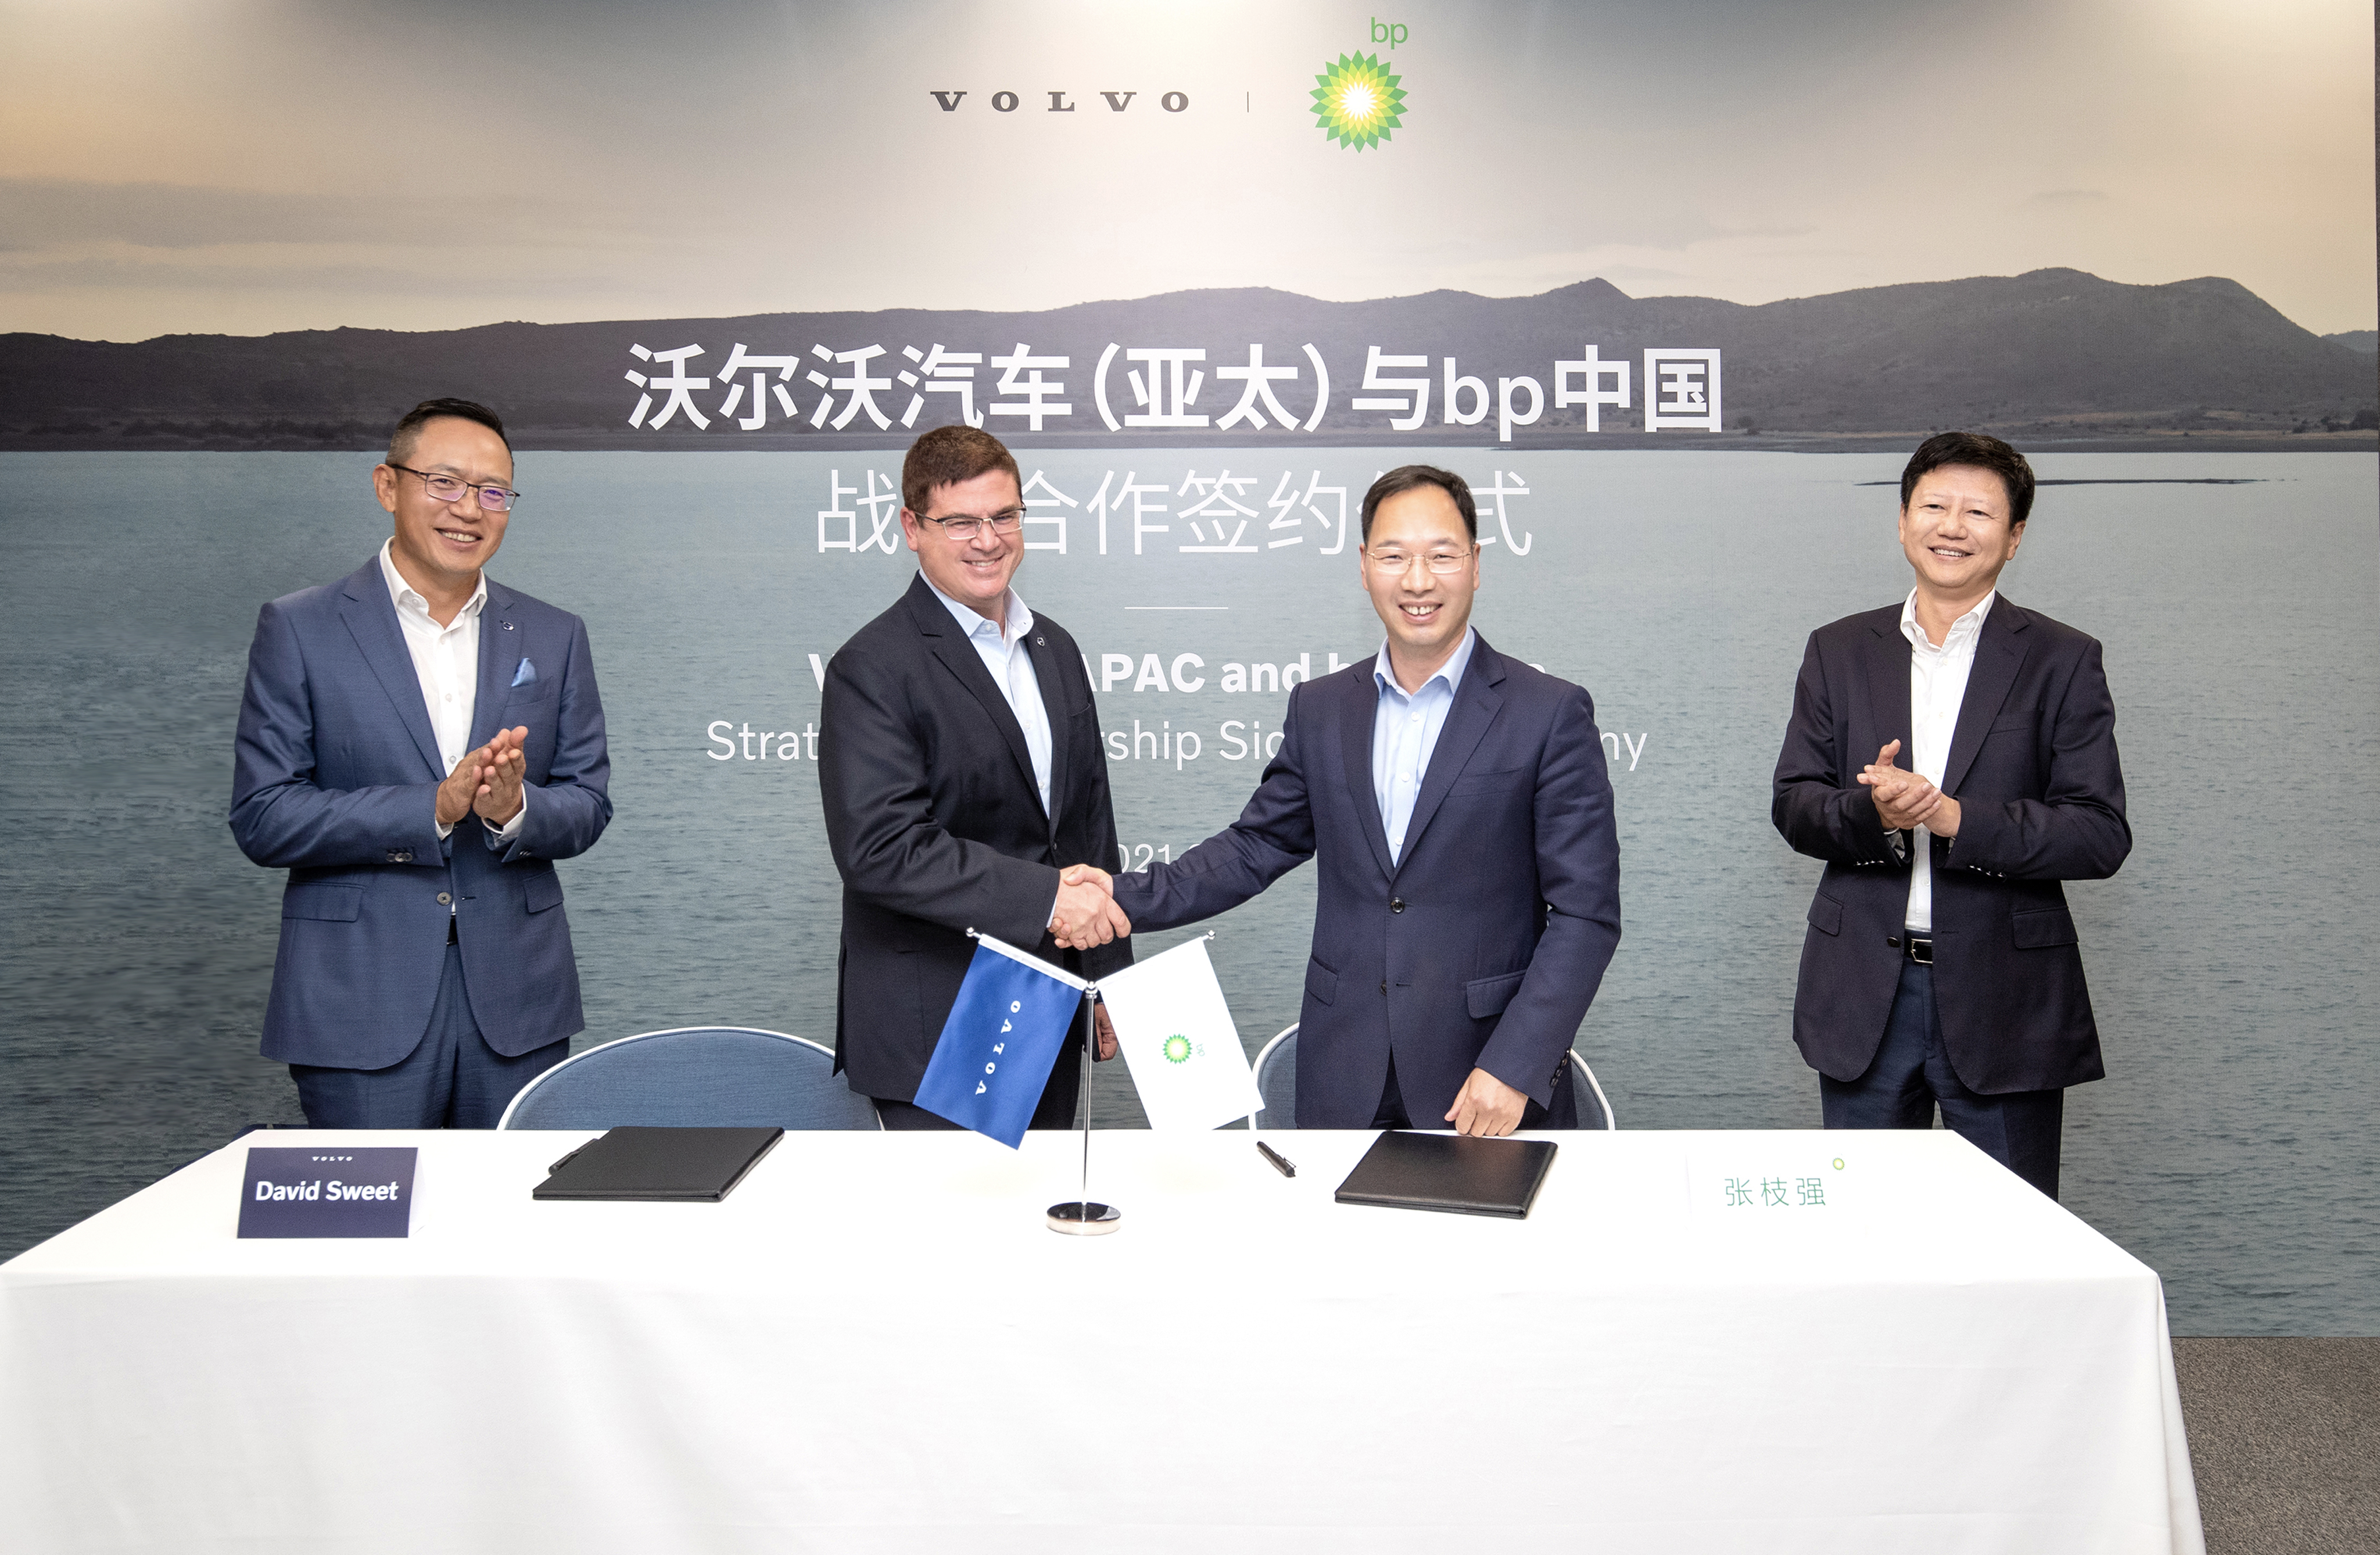 Volvo deepens strategic cooperation with BP to jointly promote sustainable development.